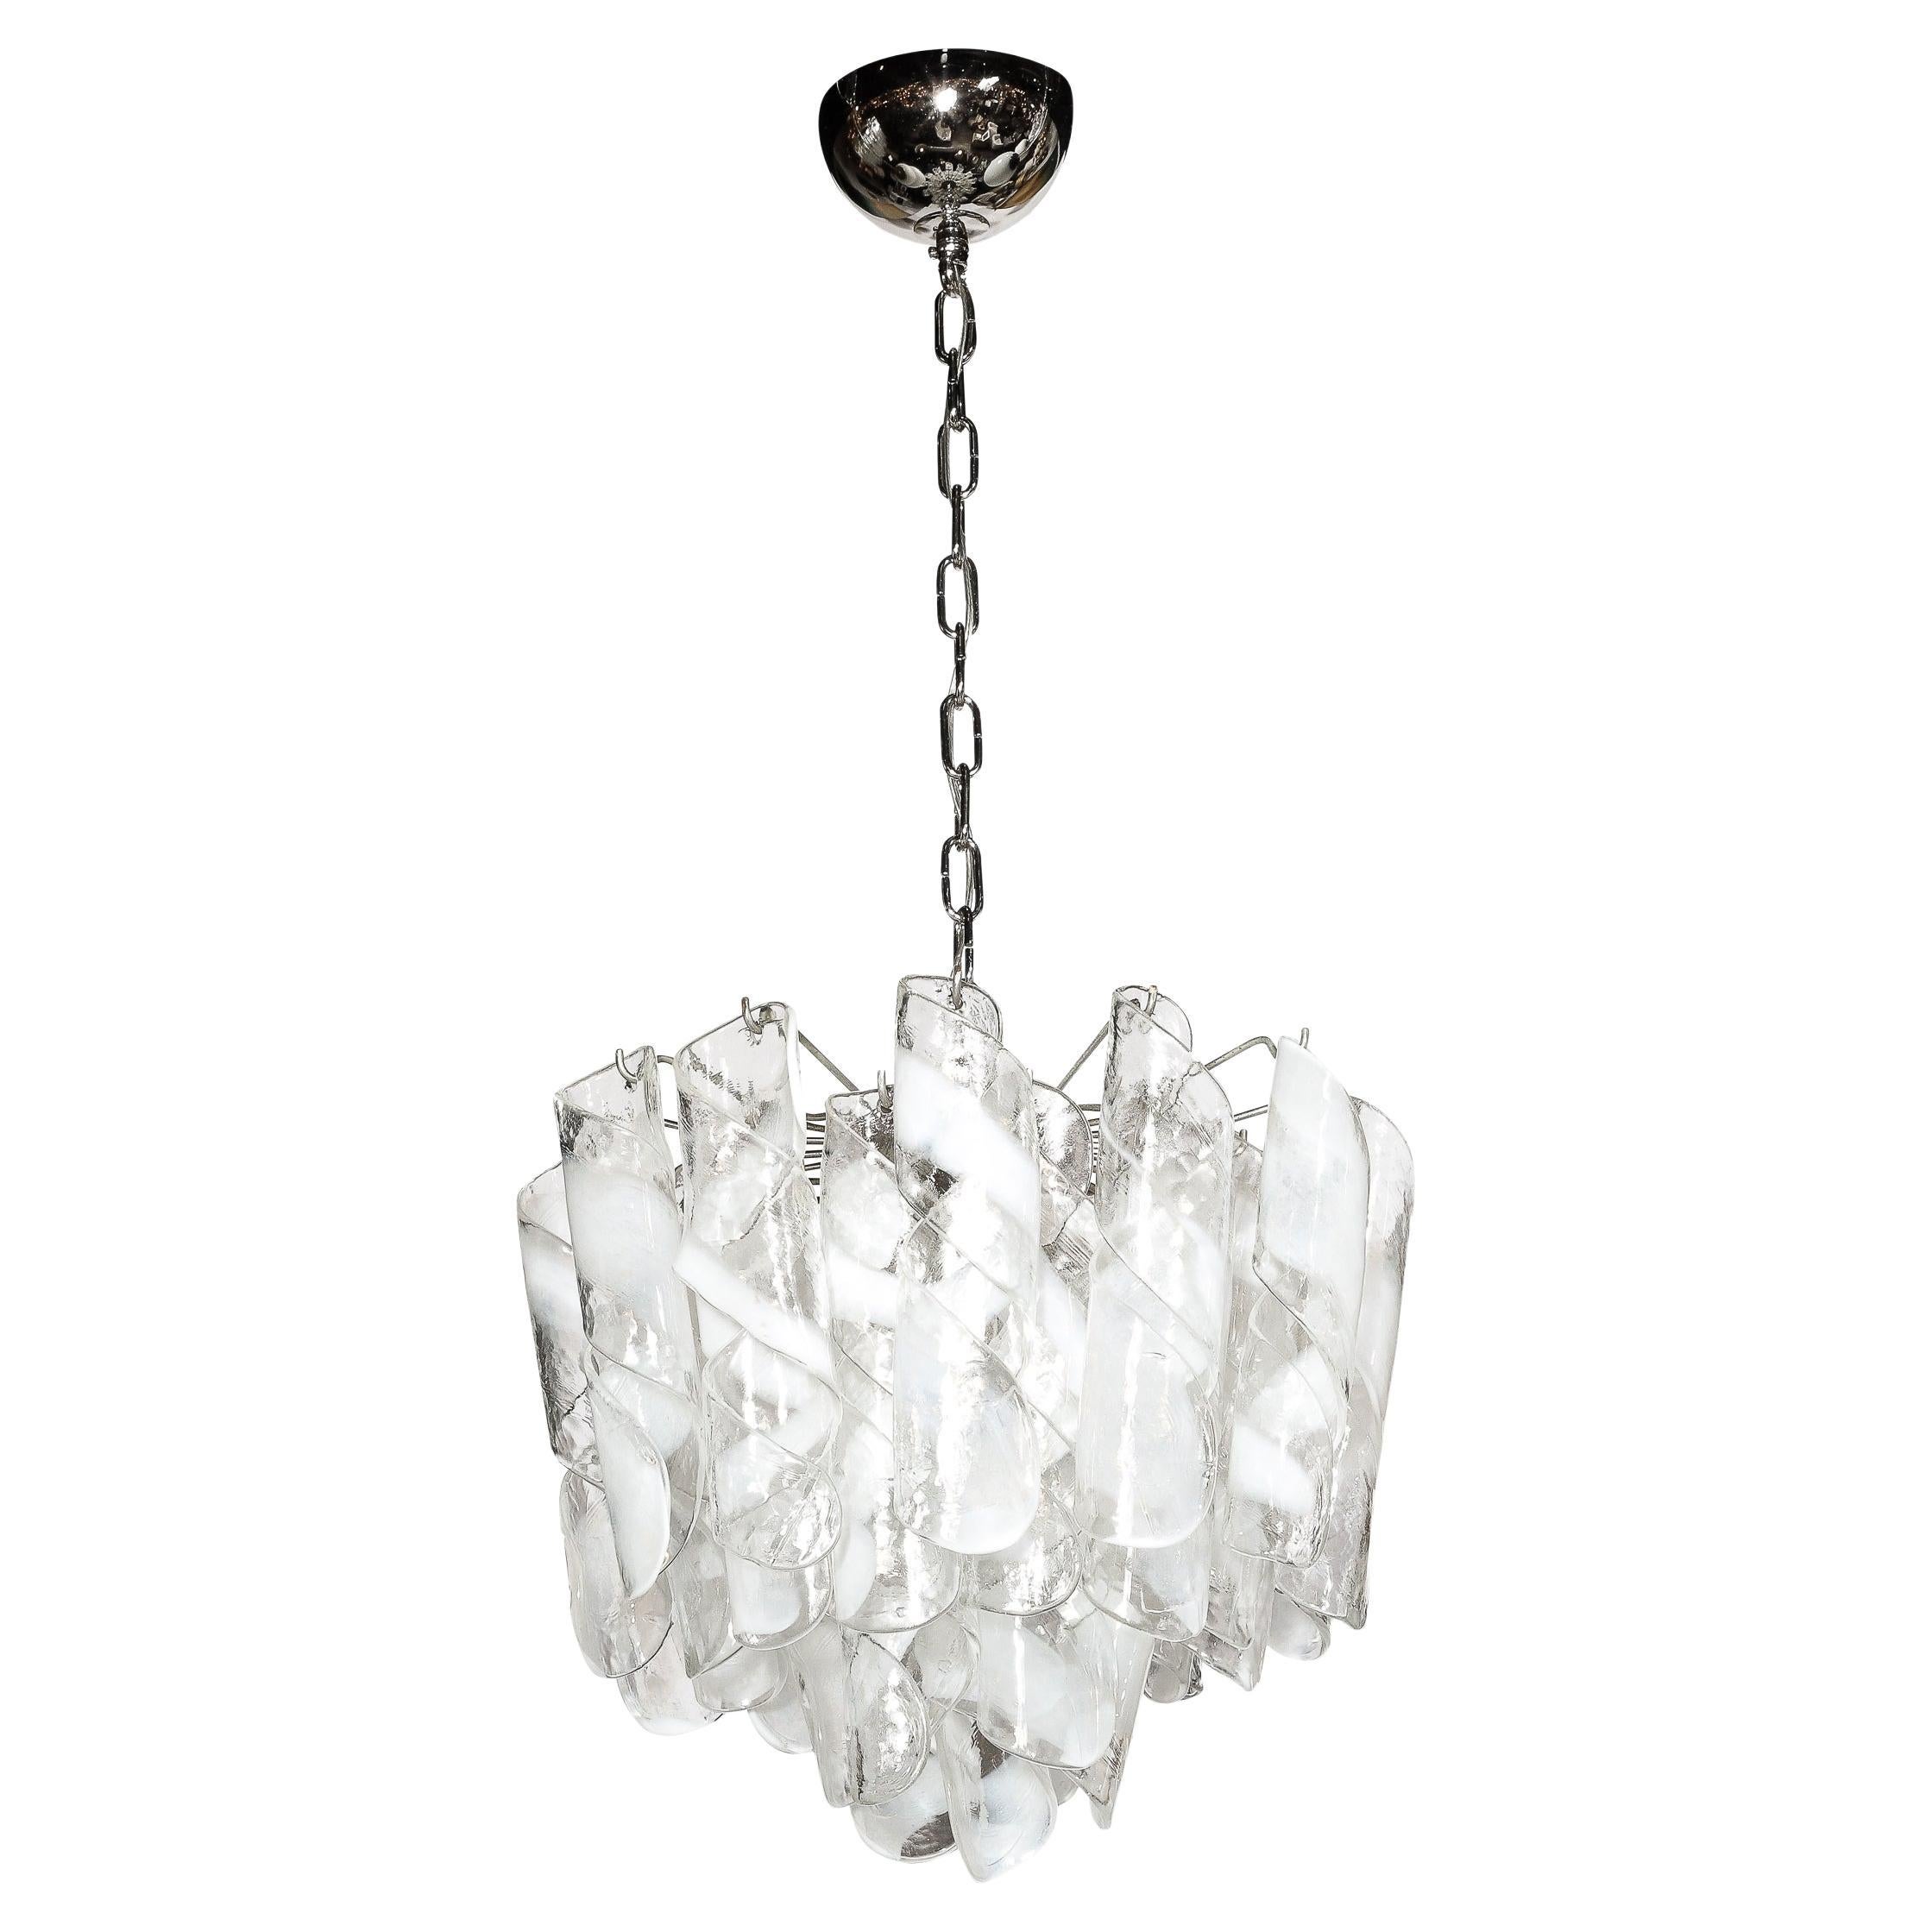 Mid-Century Modernist Hand-Blown Murano Glass Torciglioni Chandelier By Mazzega